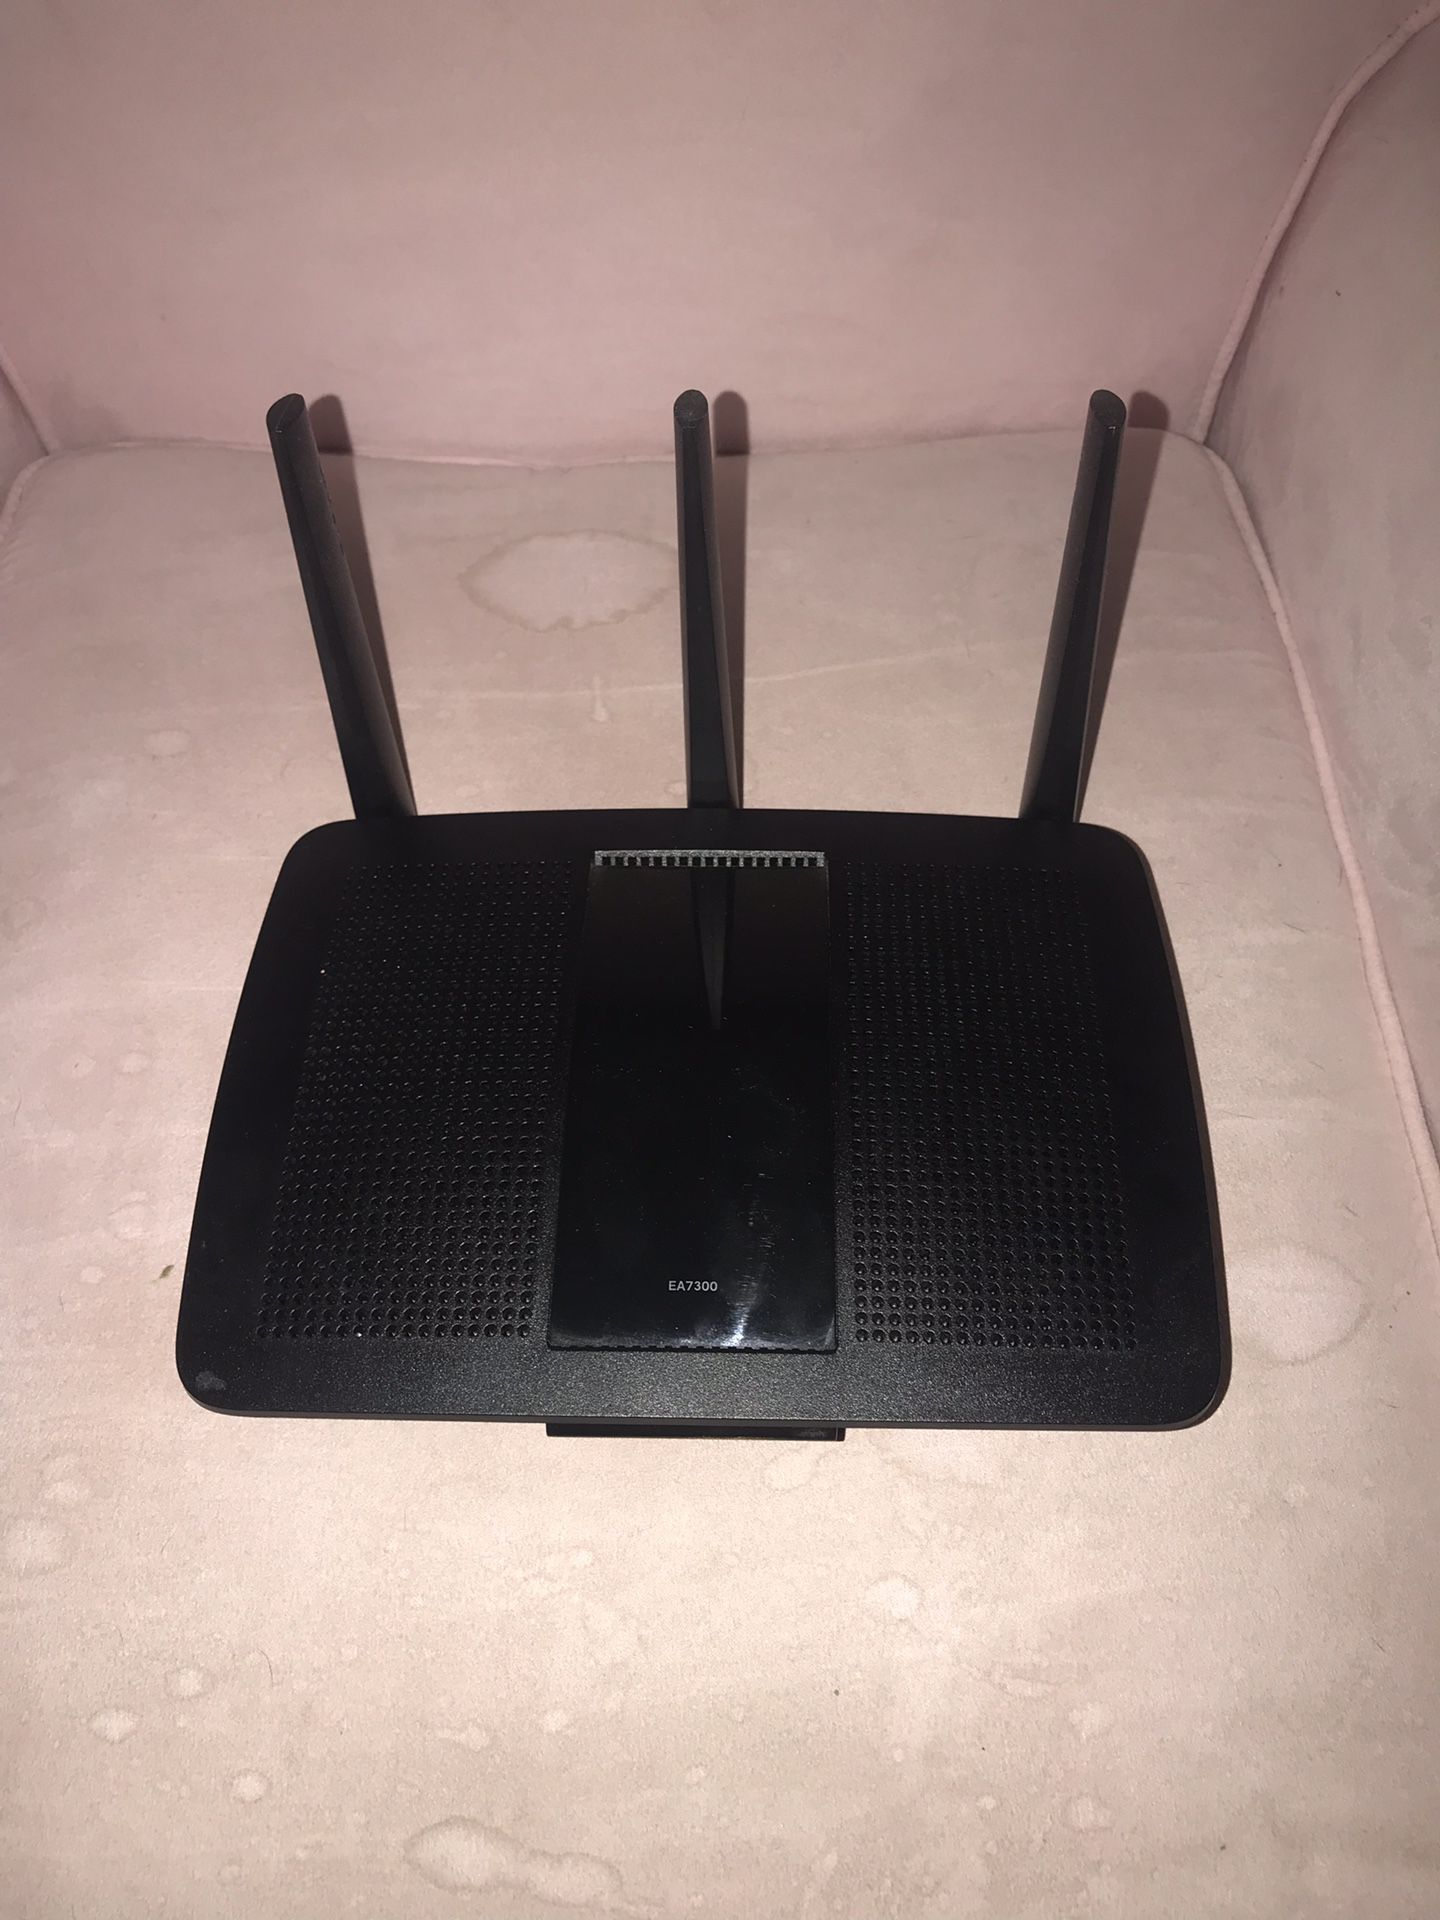 Linksys Wireless Router - Very Nice Strong Signal